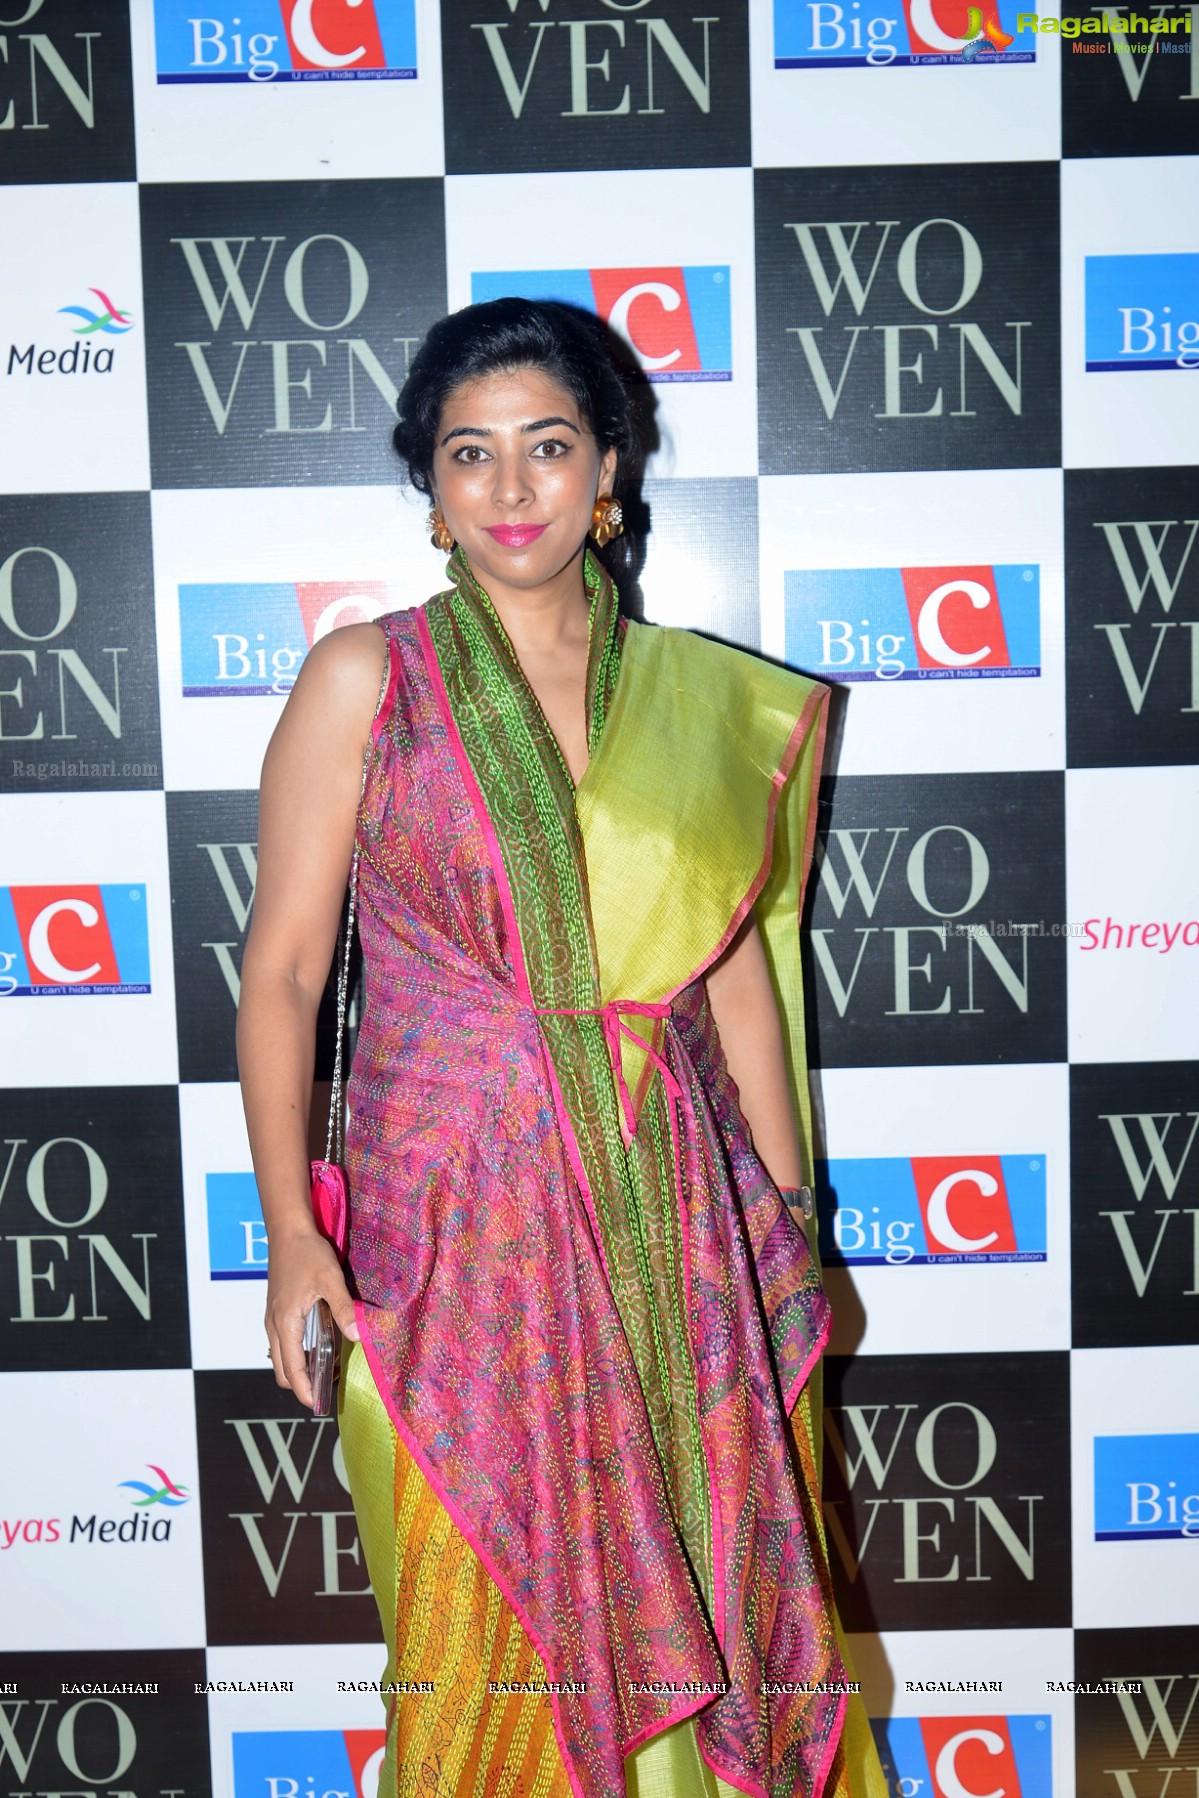 Woven 2017, Handloom Fashion show to support weavers